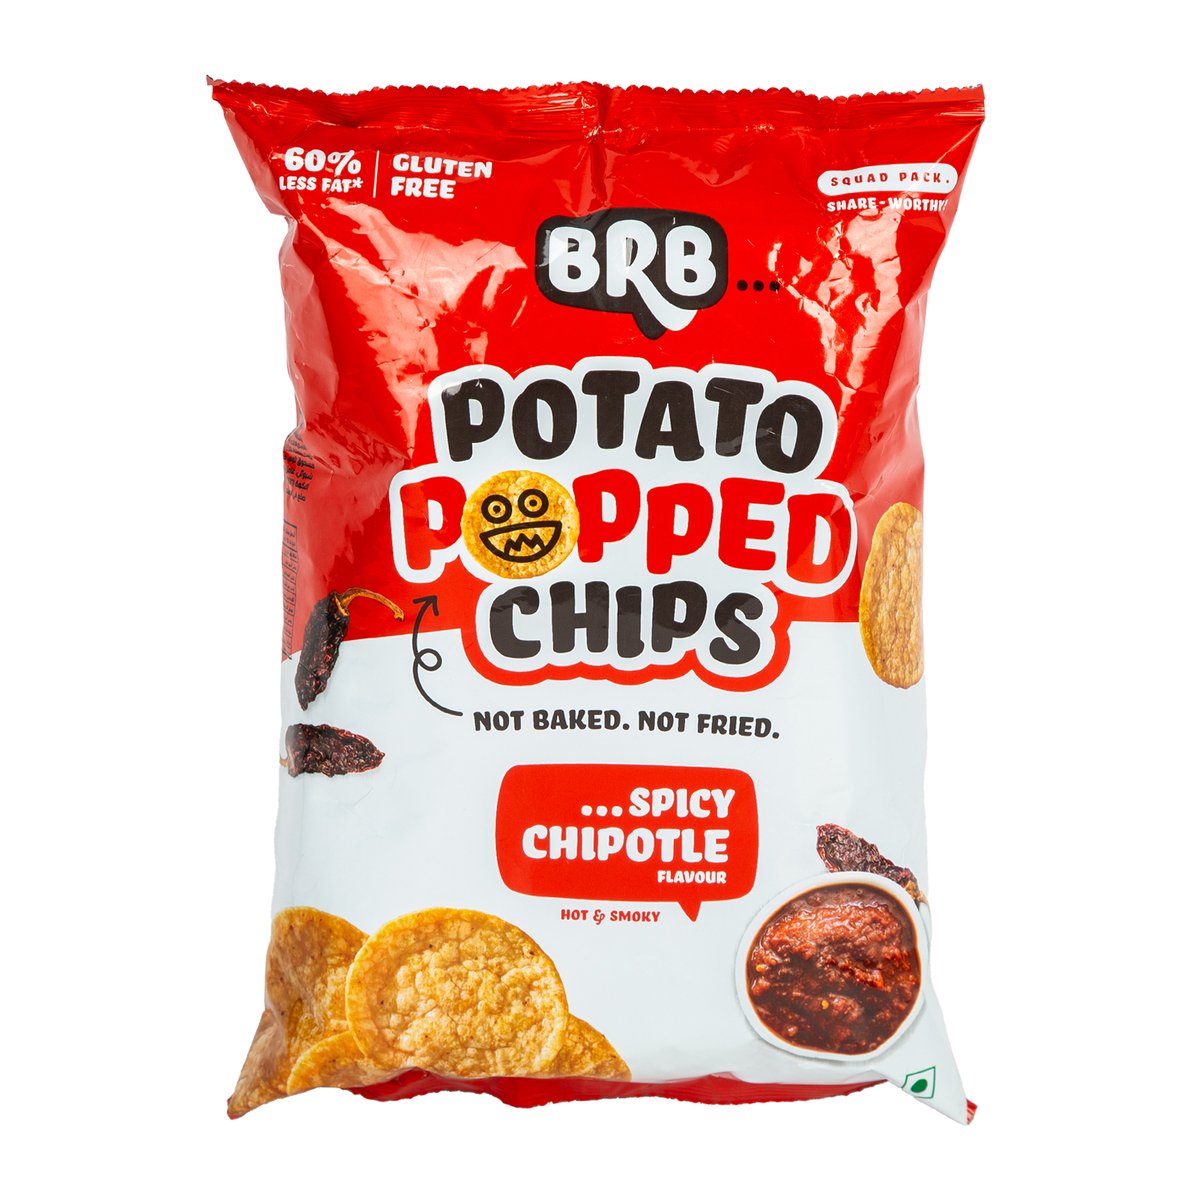 BRB Potato Popped Chips Spicy Chipotle Flavour 48 g